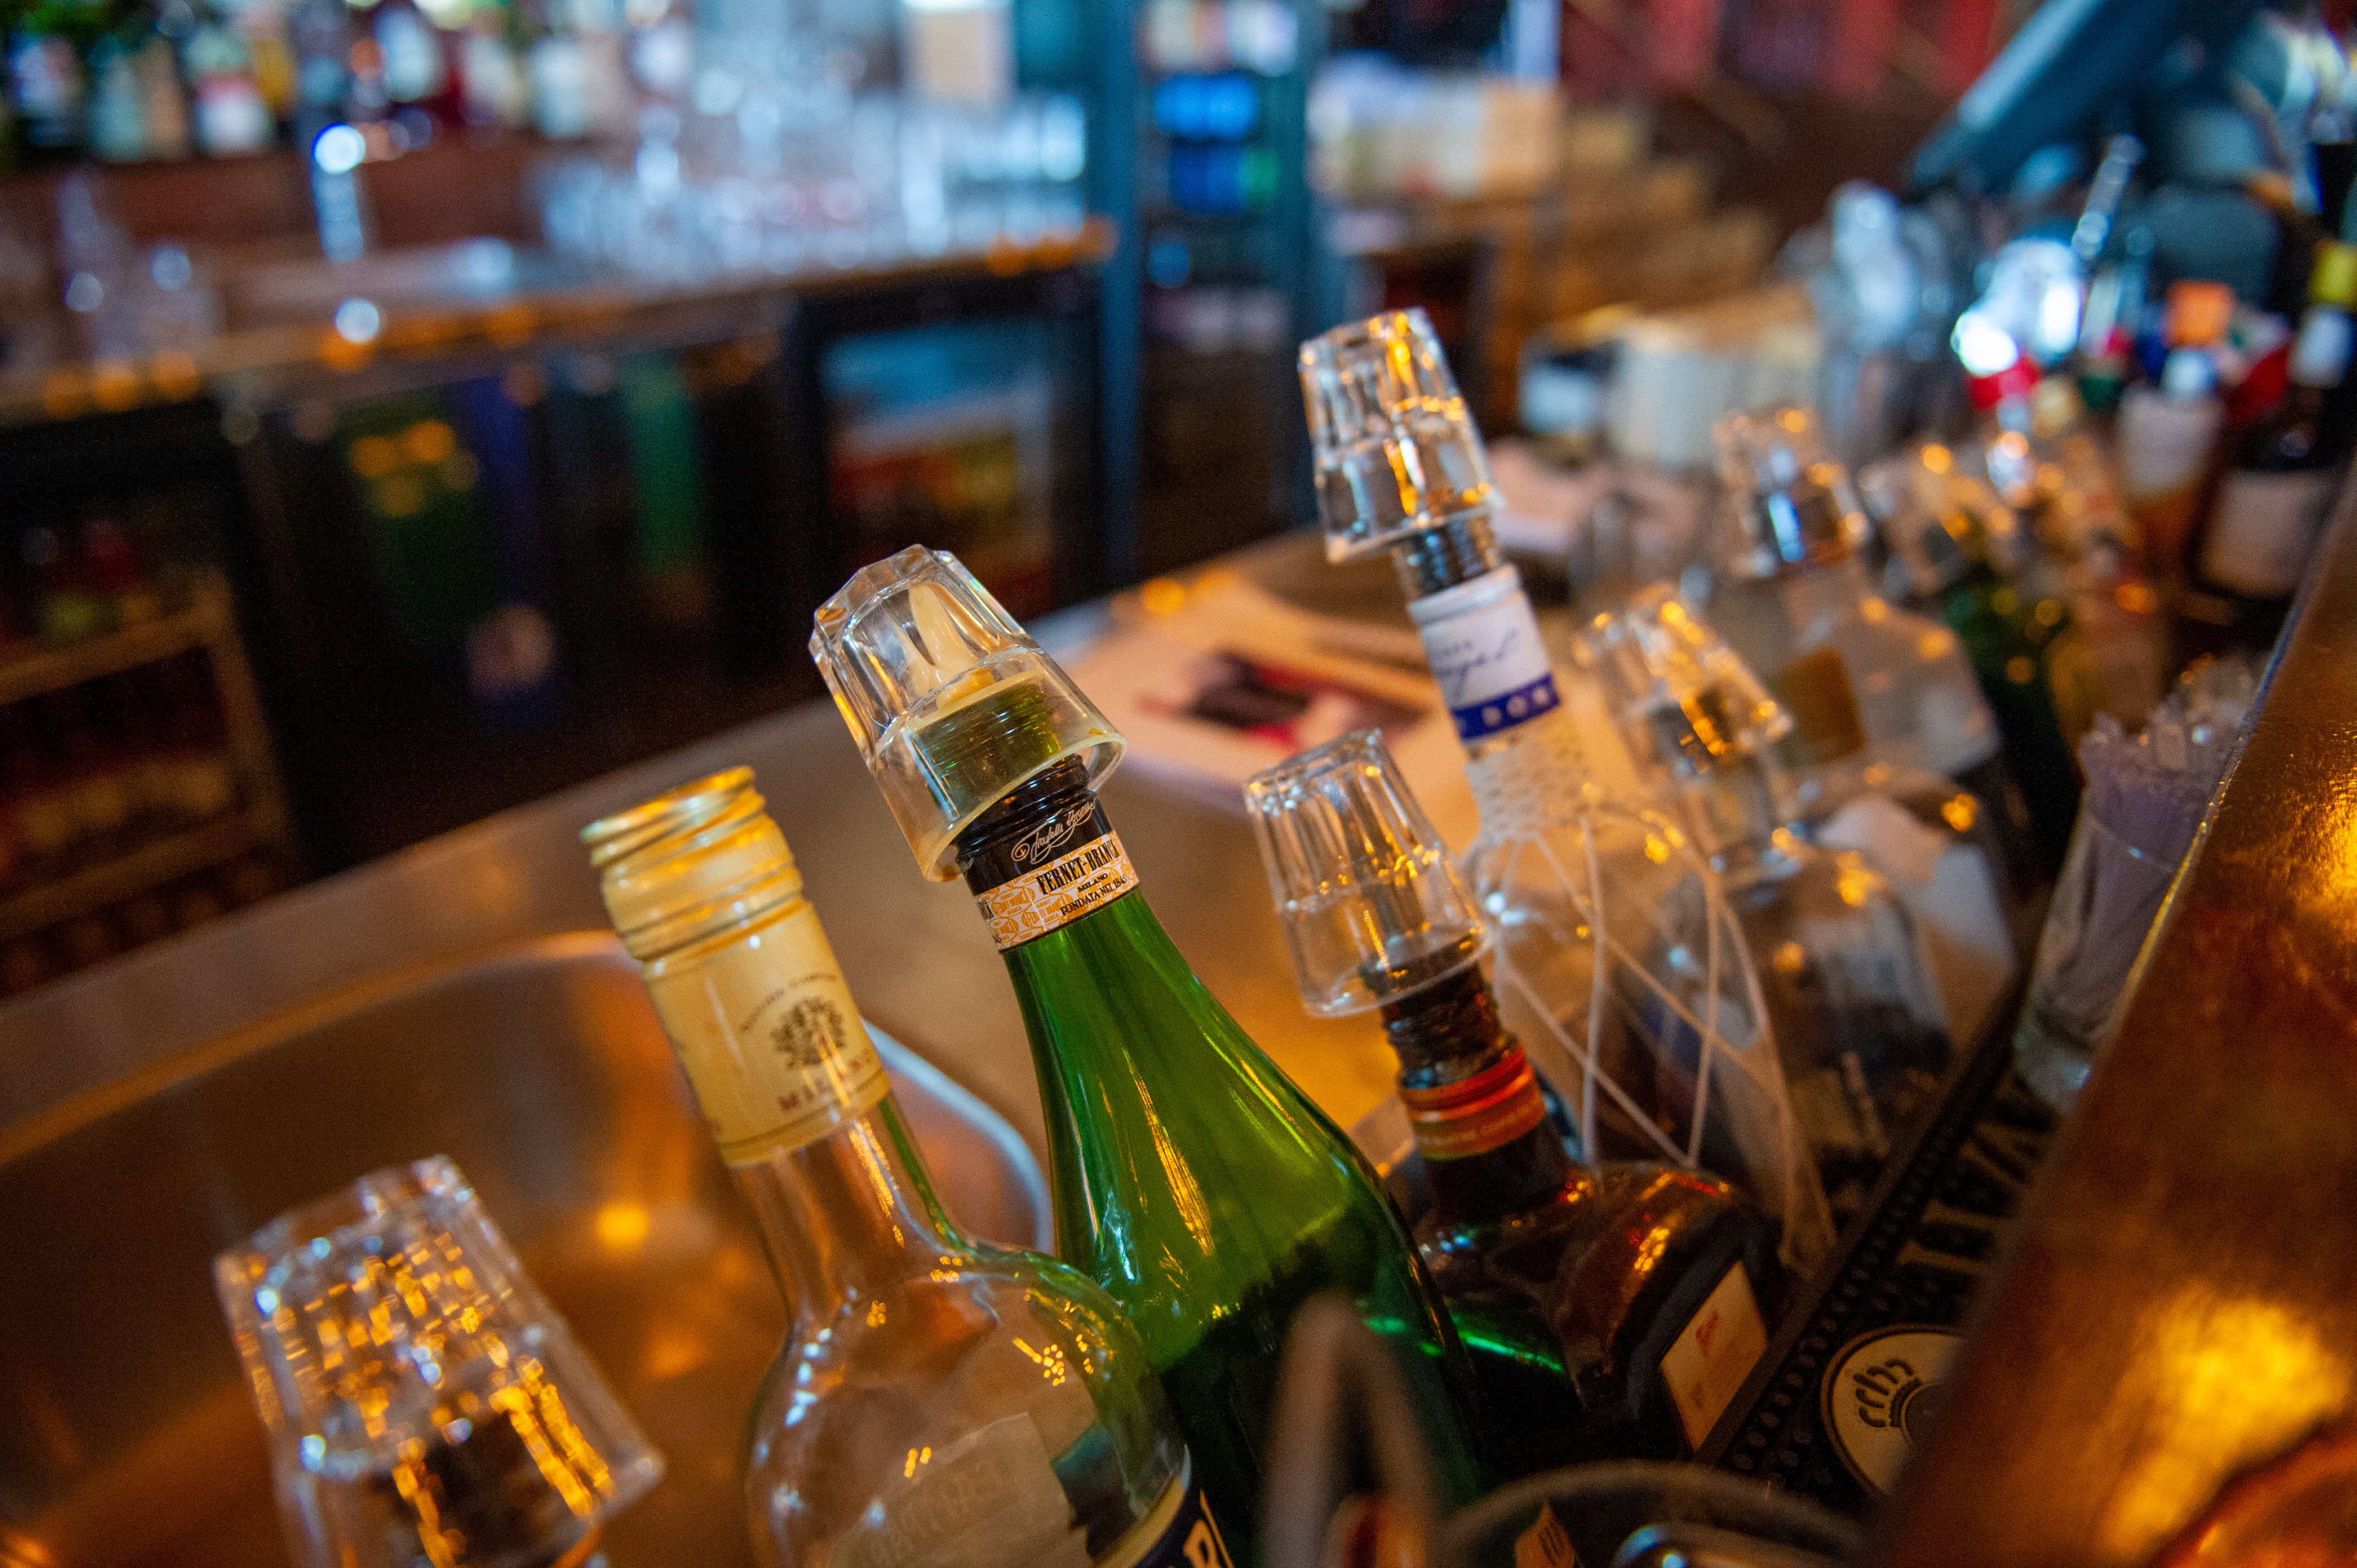 Restrictions on bars and restaurants will be eased throughout Finland